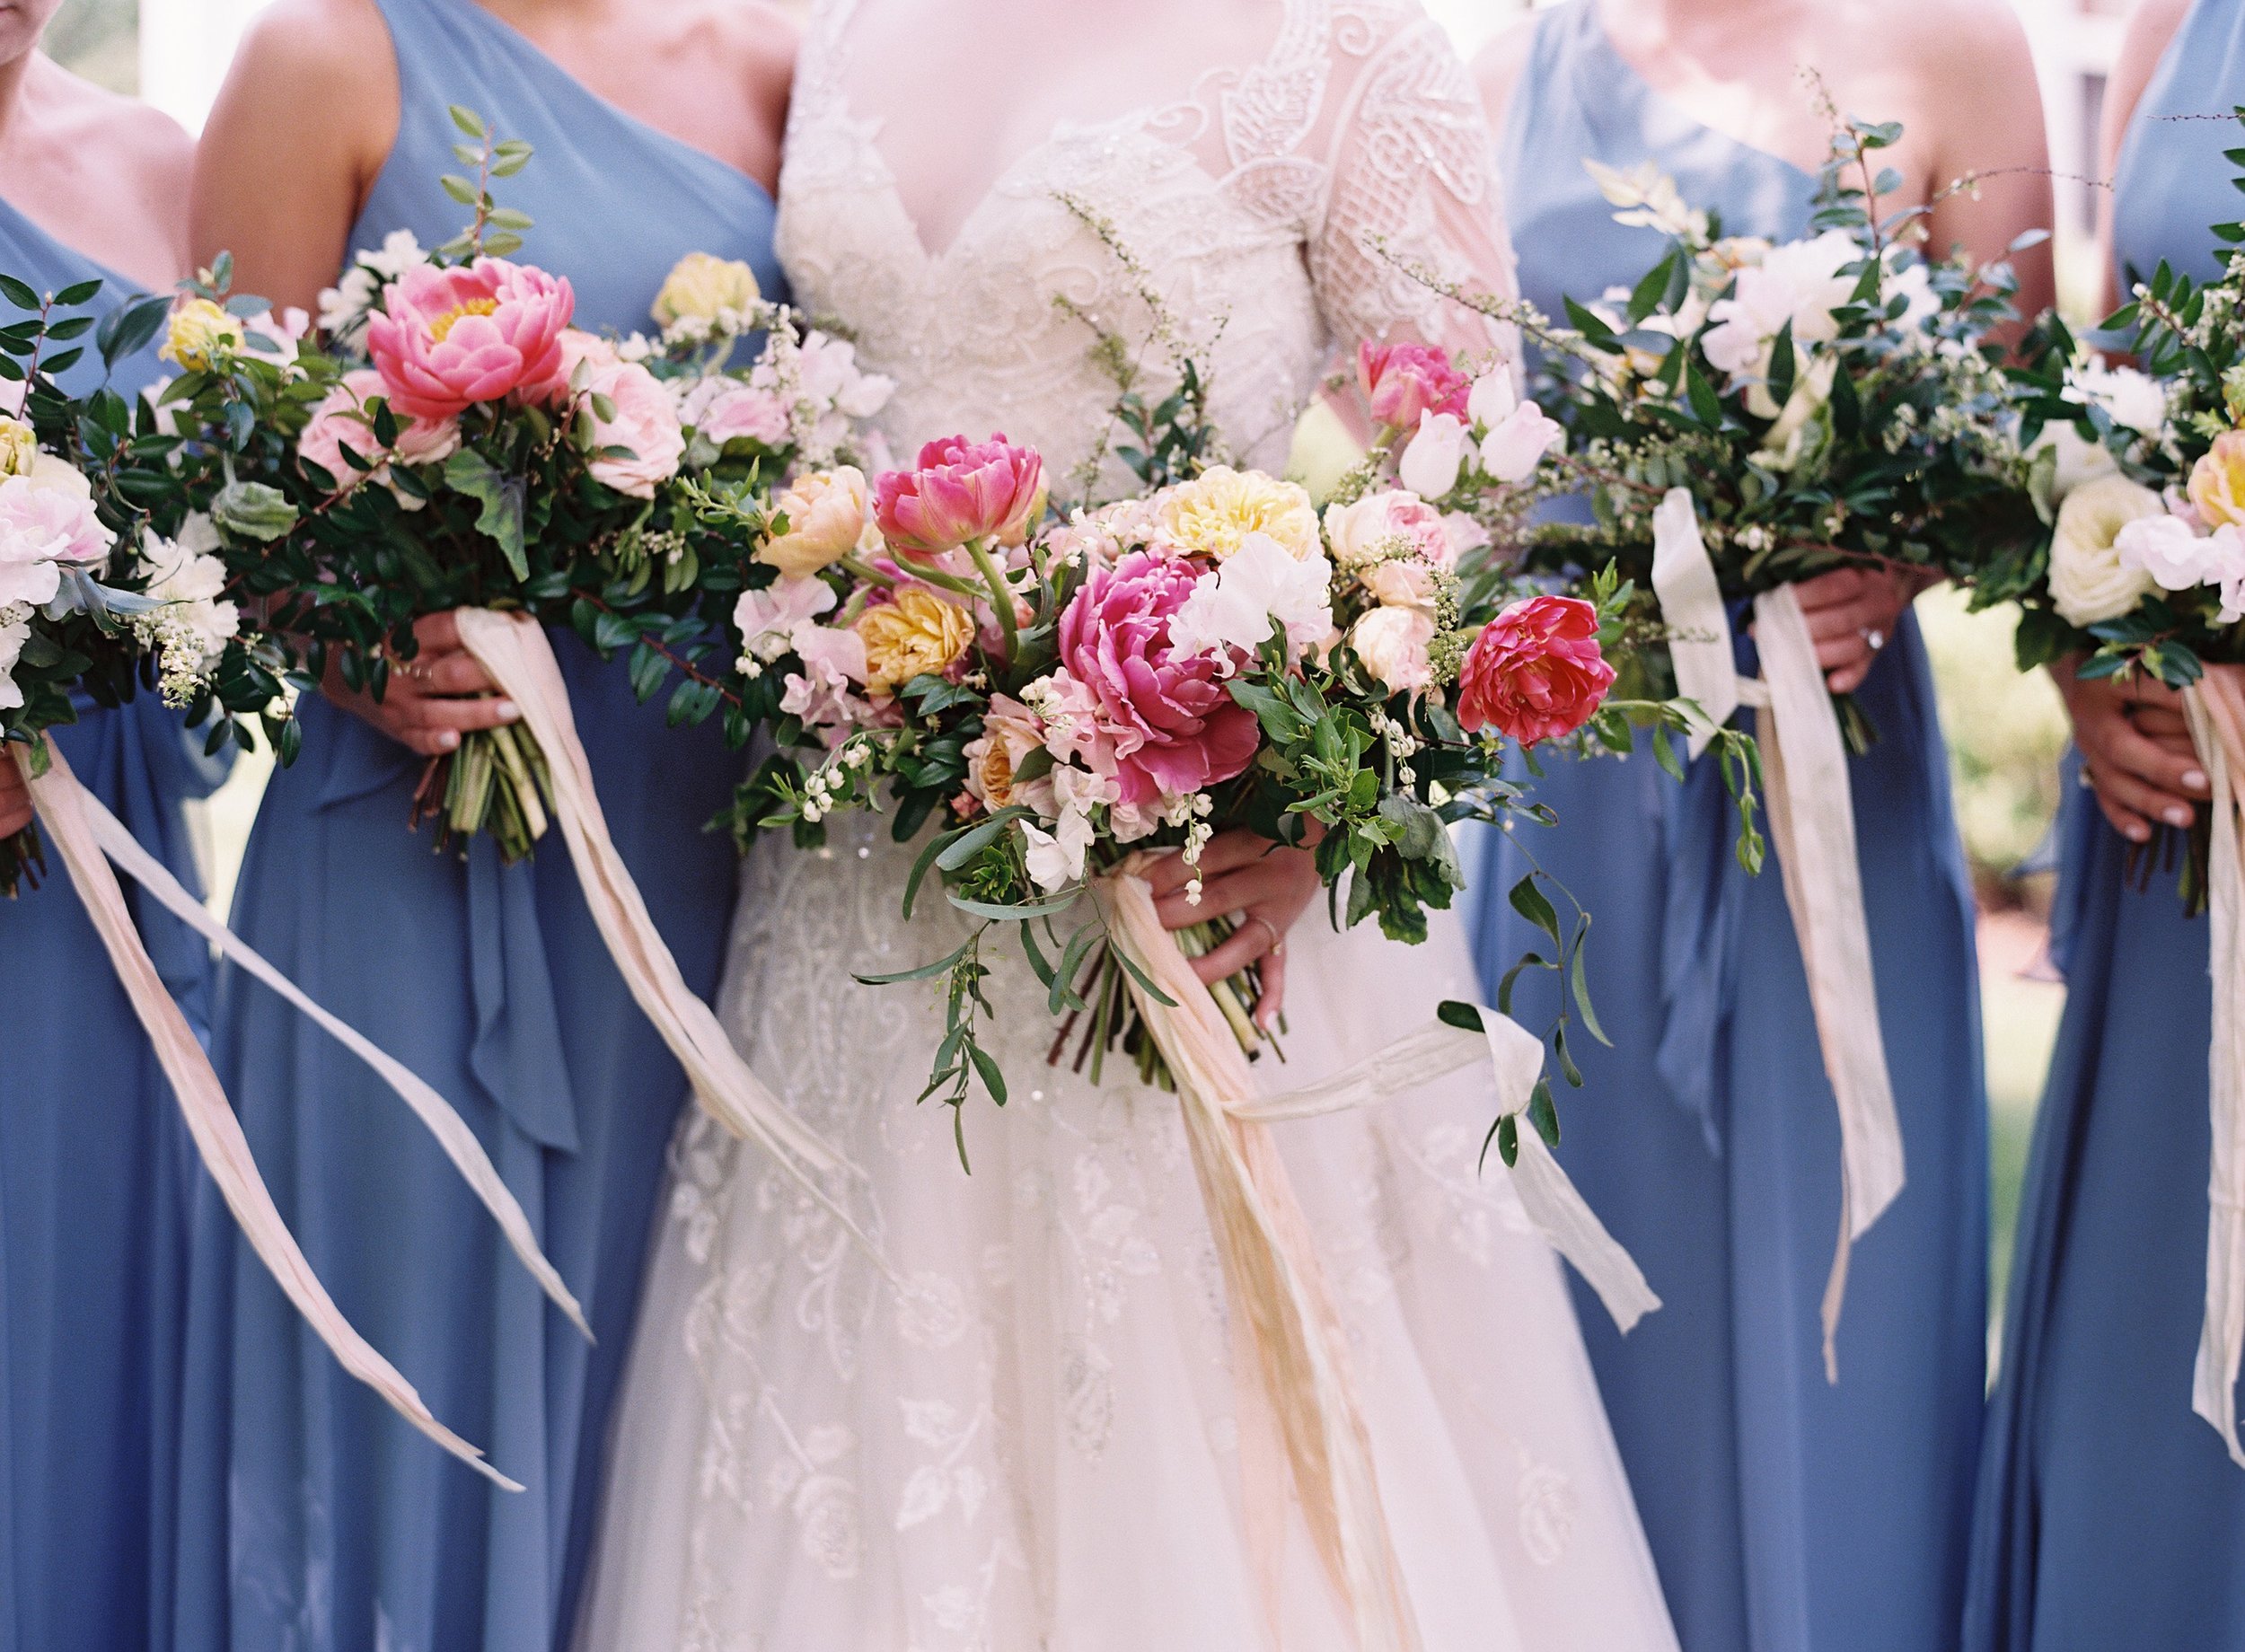 Lush bridal bouquet of peonies, tulips, lily of the valley, garden roses, and sweet peas with streaming silk ribbon // Nashville Wedding Floral Design